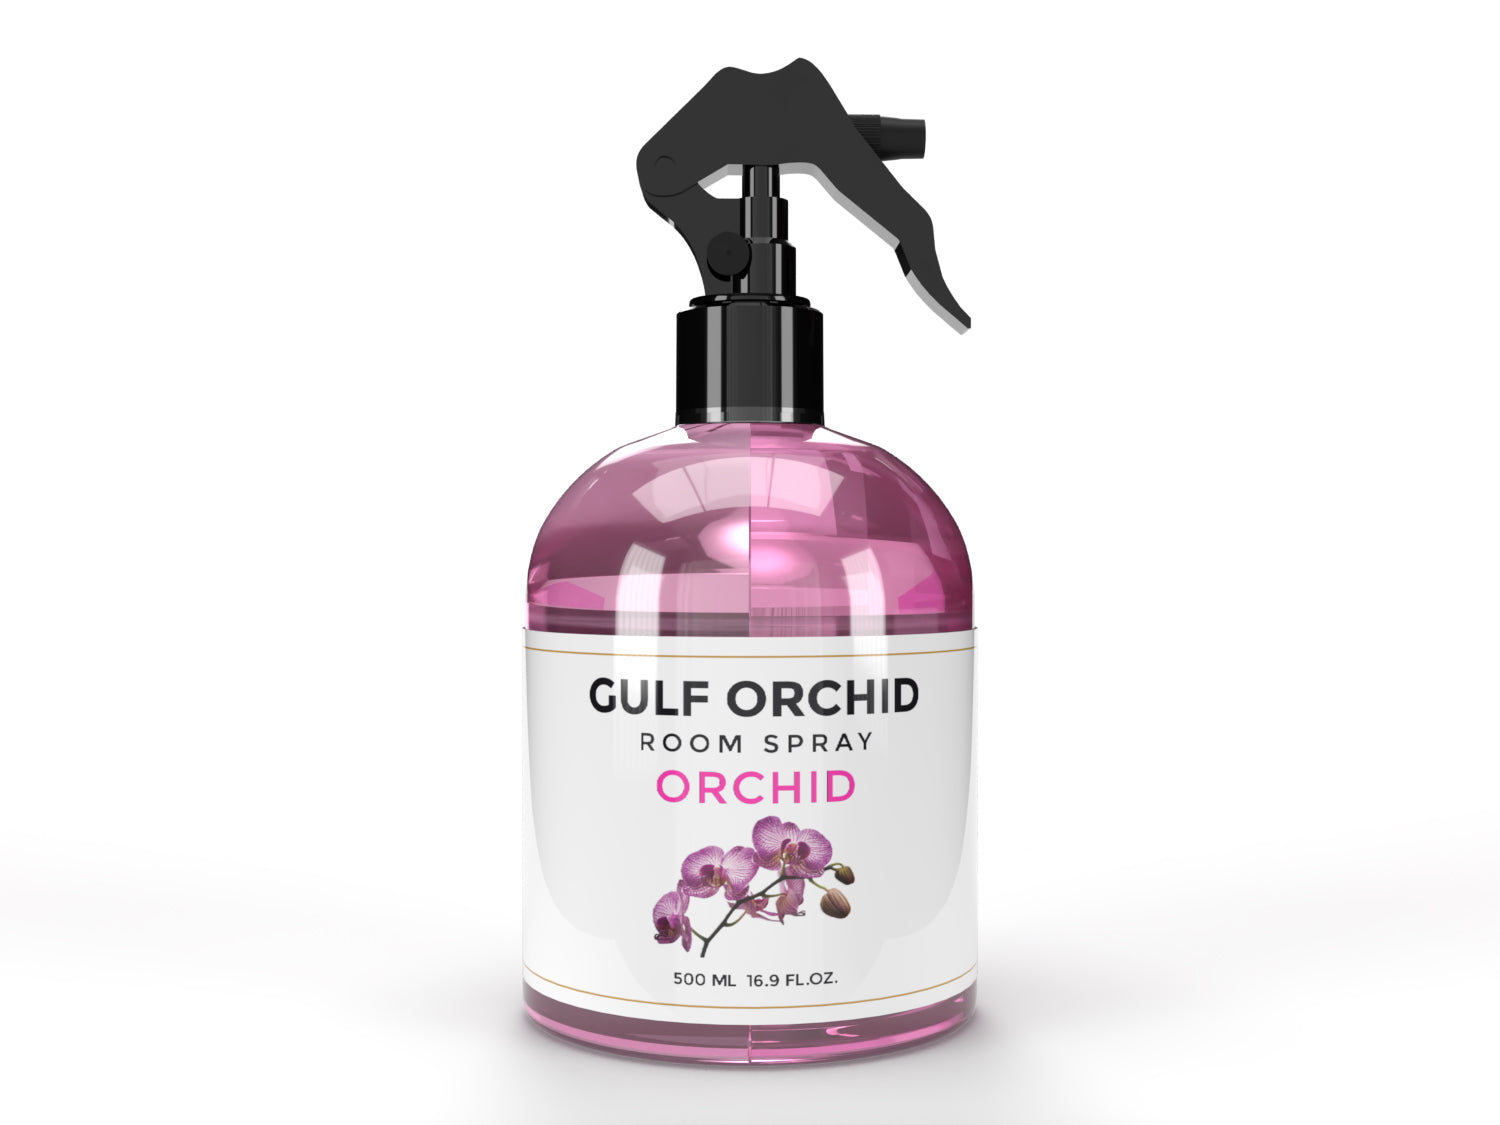 GULF ORCHID ROOM SPRAY 500 ML ORCHID